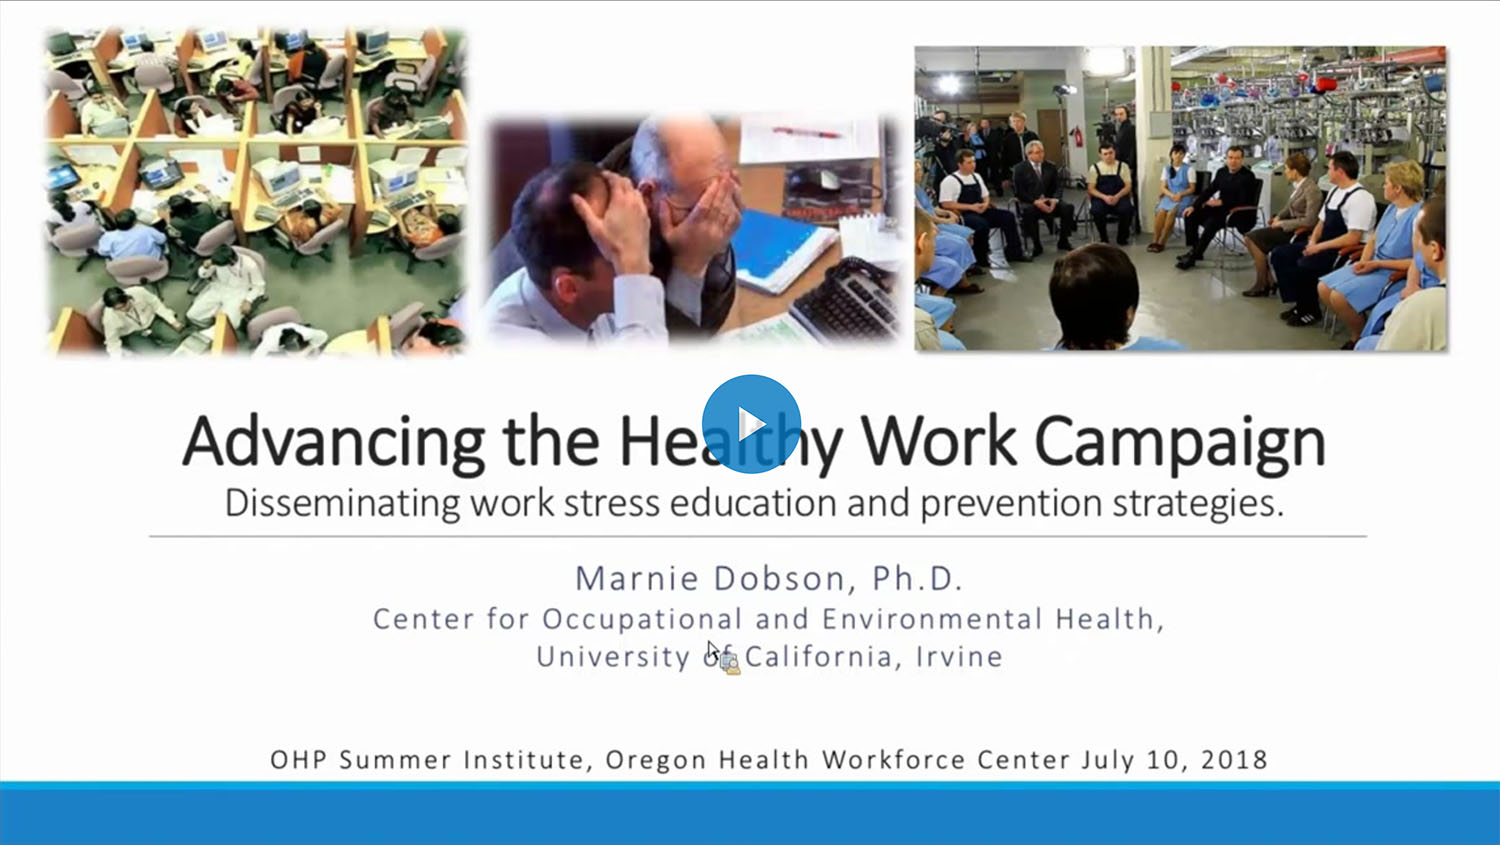 Advancing the Healthy Work Campaign: Disseminating Work Stress Education and Prevention Strategies